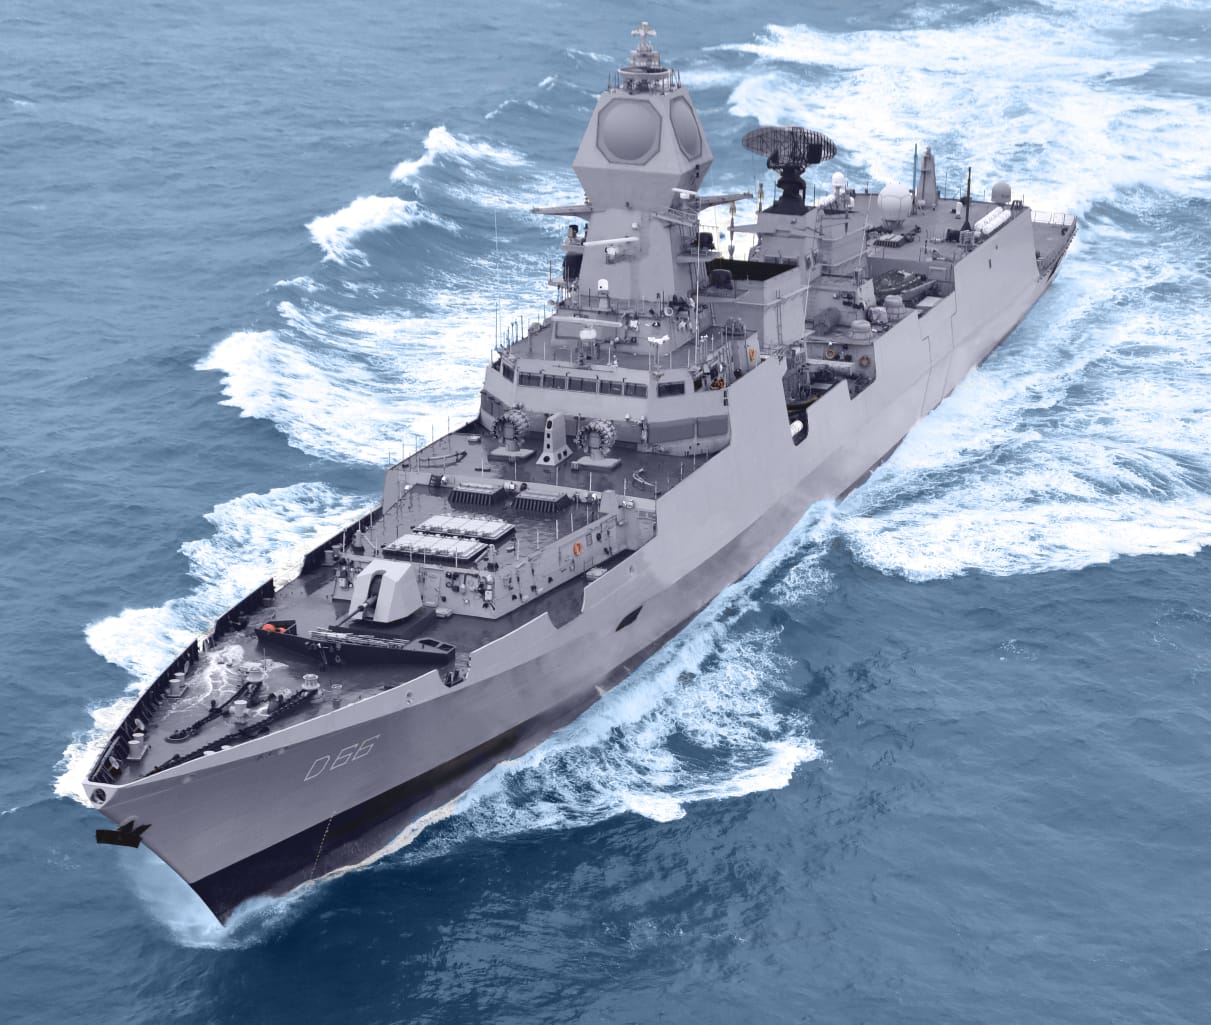 Visakhapatnam D66 P15B destroyer of Indian Navy during sea trials